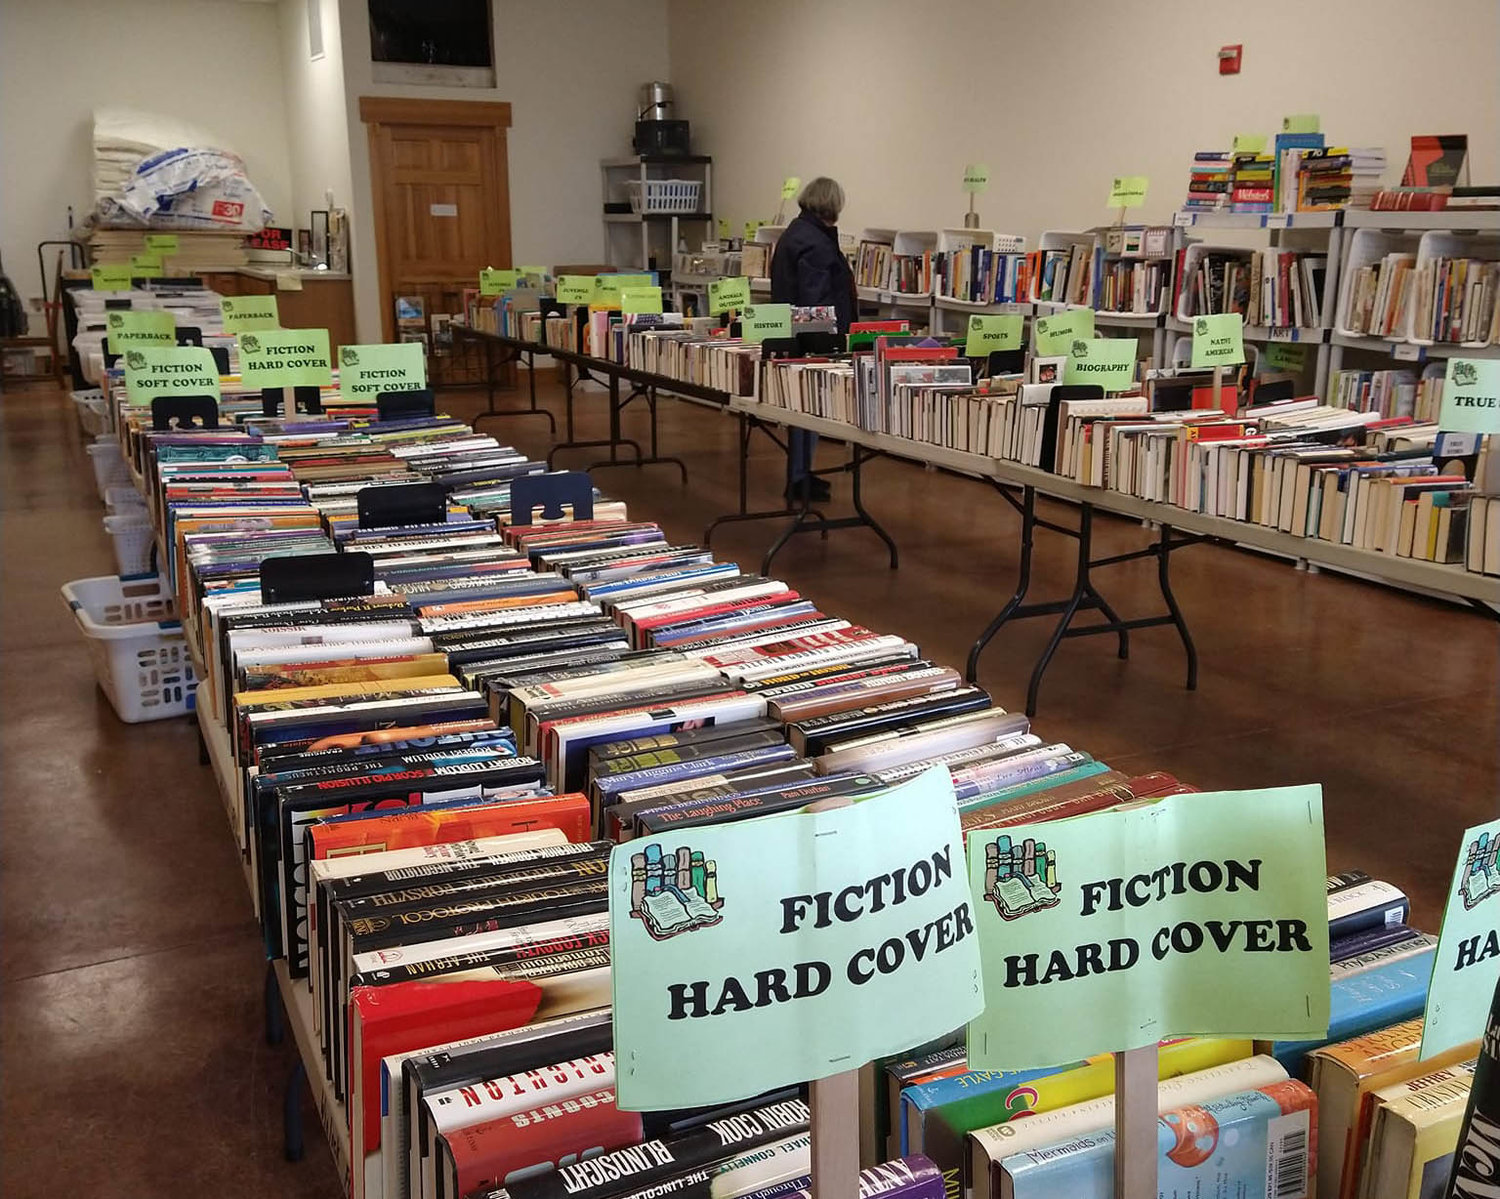 FILE PHOTO — Books are pictured at a Friends of the Winlock Library book sale fundraiser earlier this year.